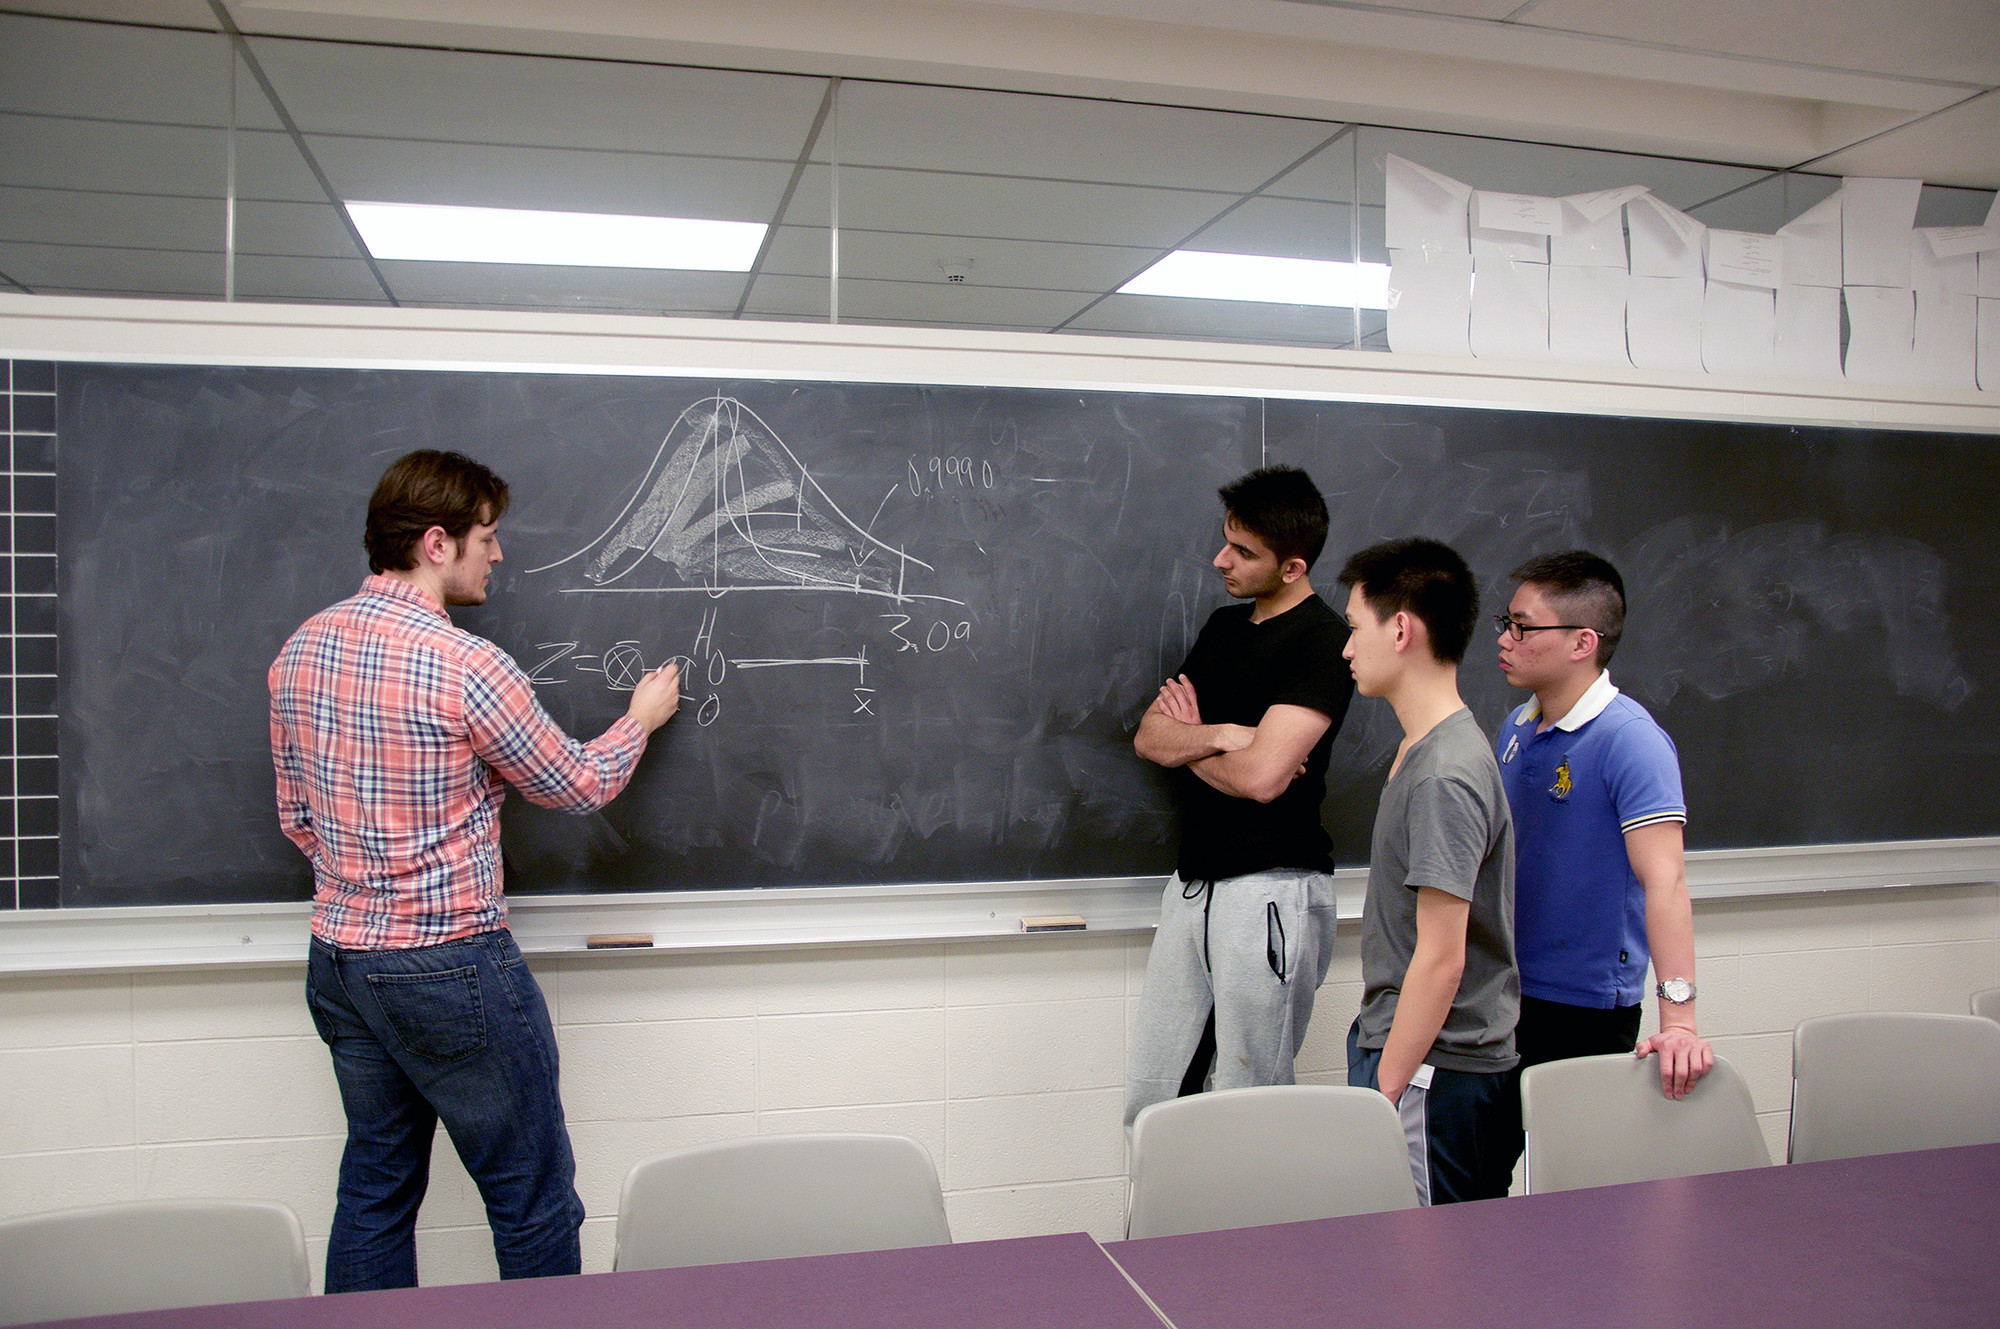 Professor writing an equation on a chalkboard while three students watch